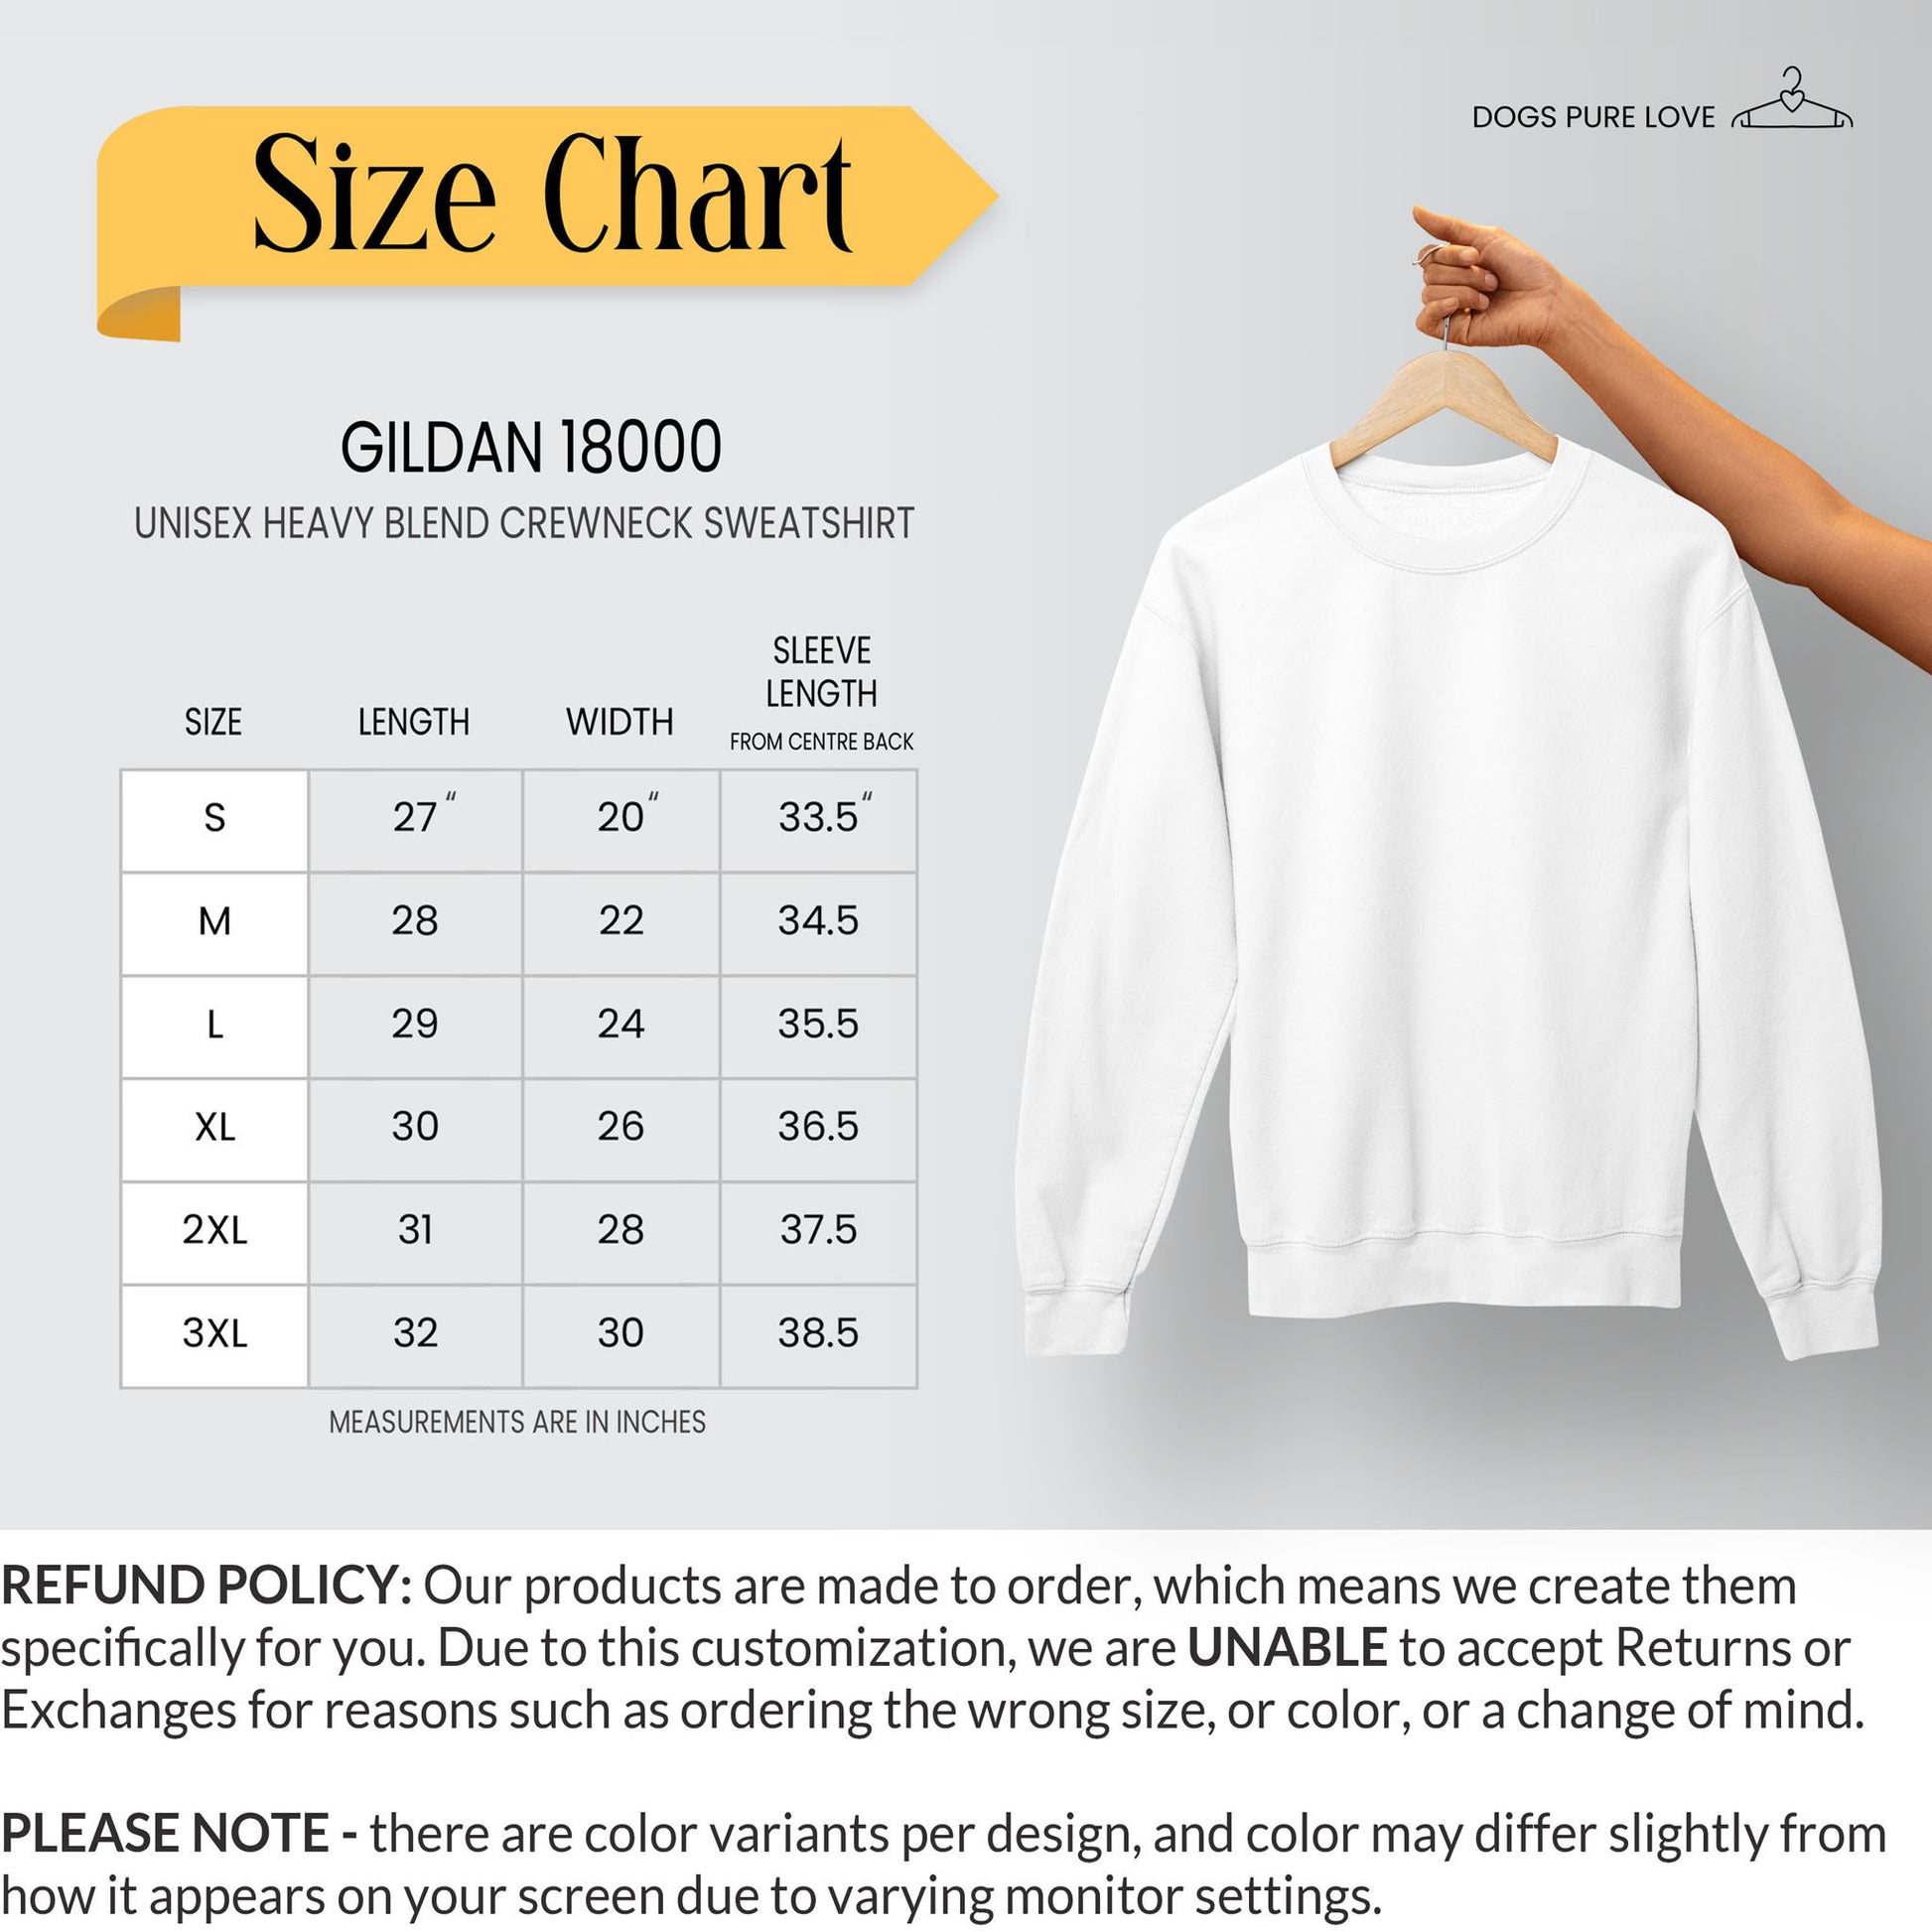 A sweatshirt size chart with measurements displays a Refund Policy description.